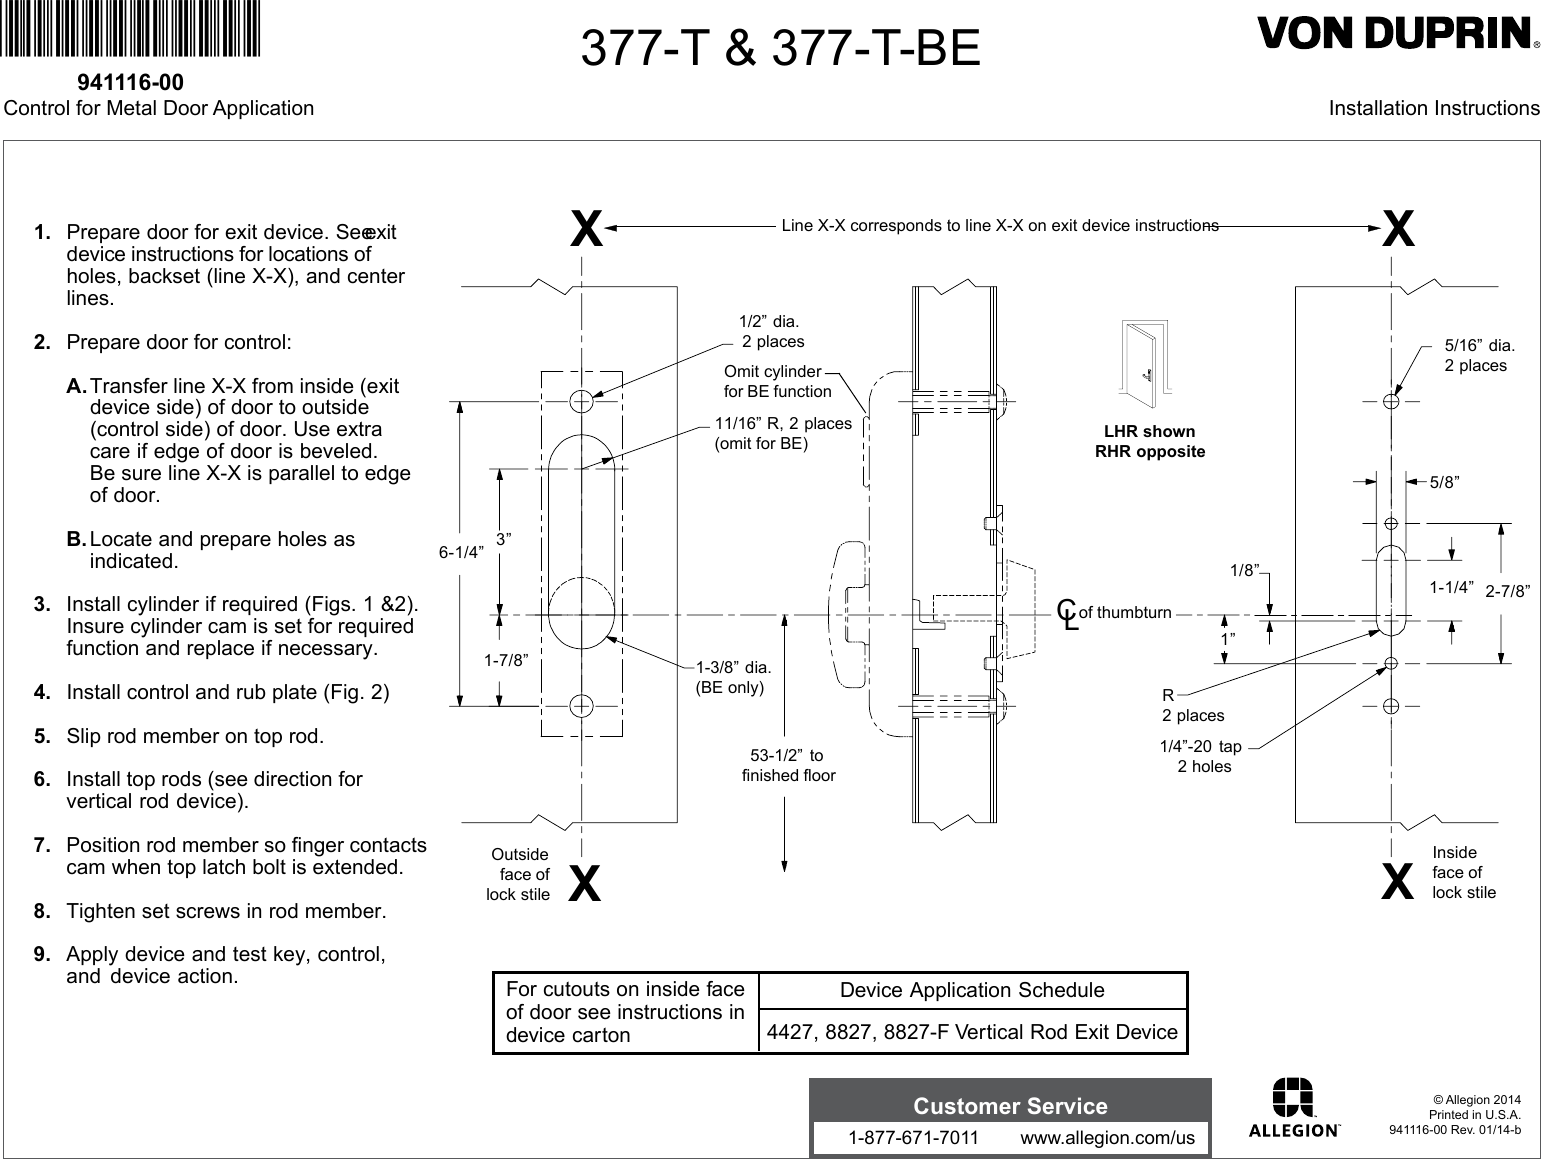 Page 1 of 2 - Von Duprin 377T T-BE Control For 4427 8827 8827-F Vertical Rod Installation Instructions 377-&, 377-T-BE 4427/8827 F 107735